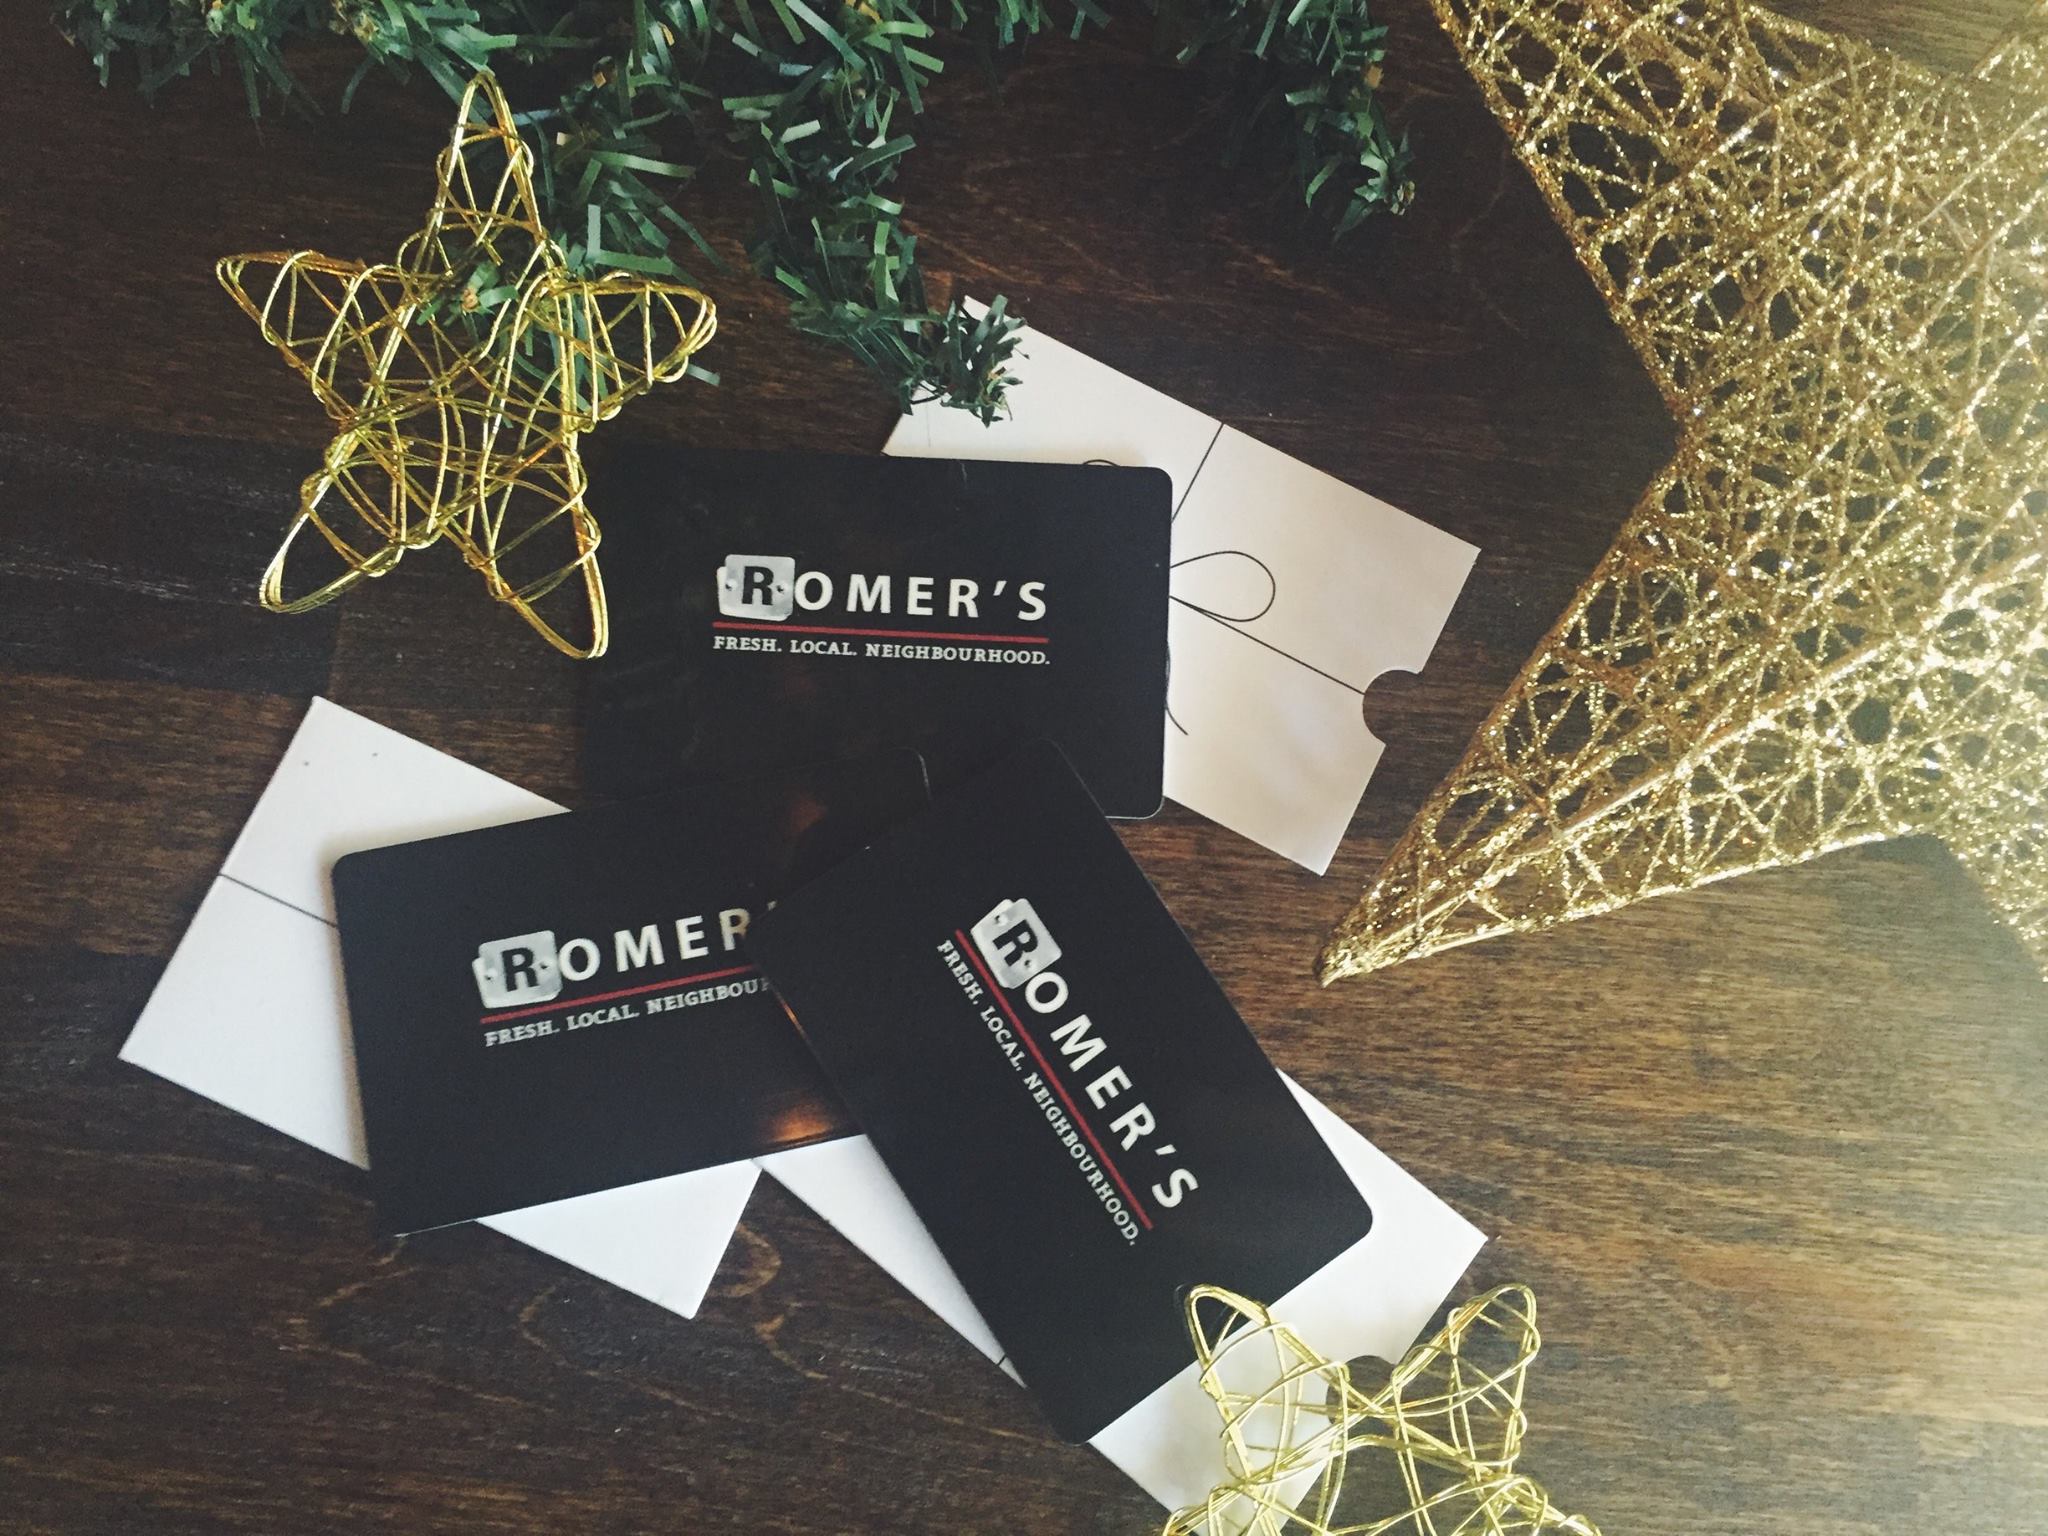 Romers-gift-cards